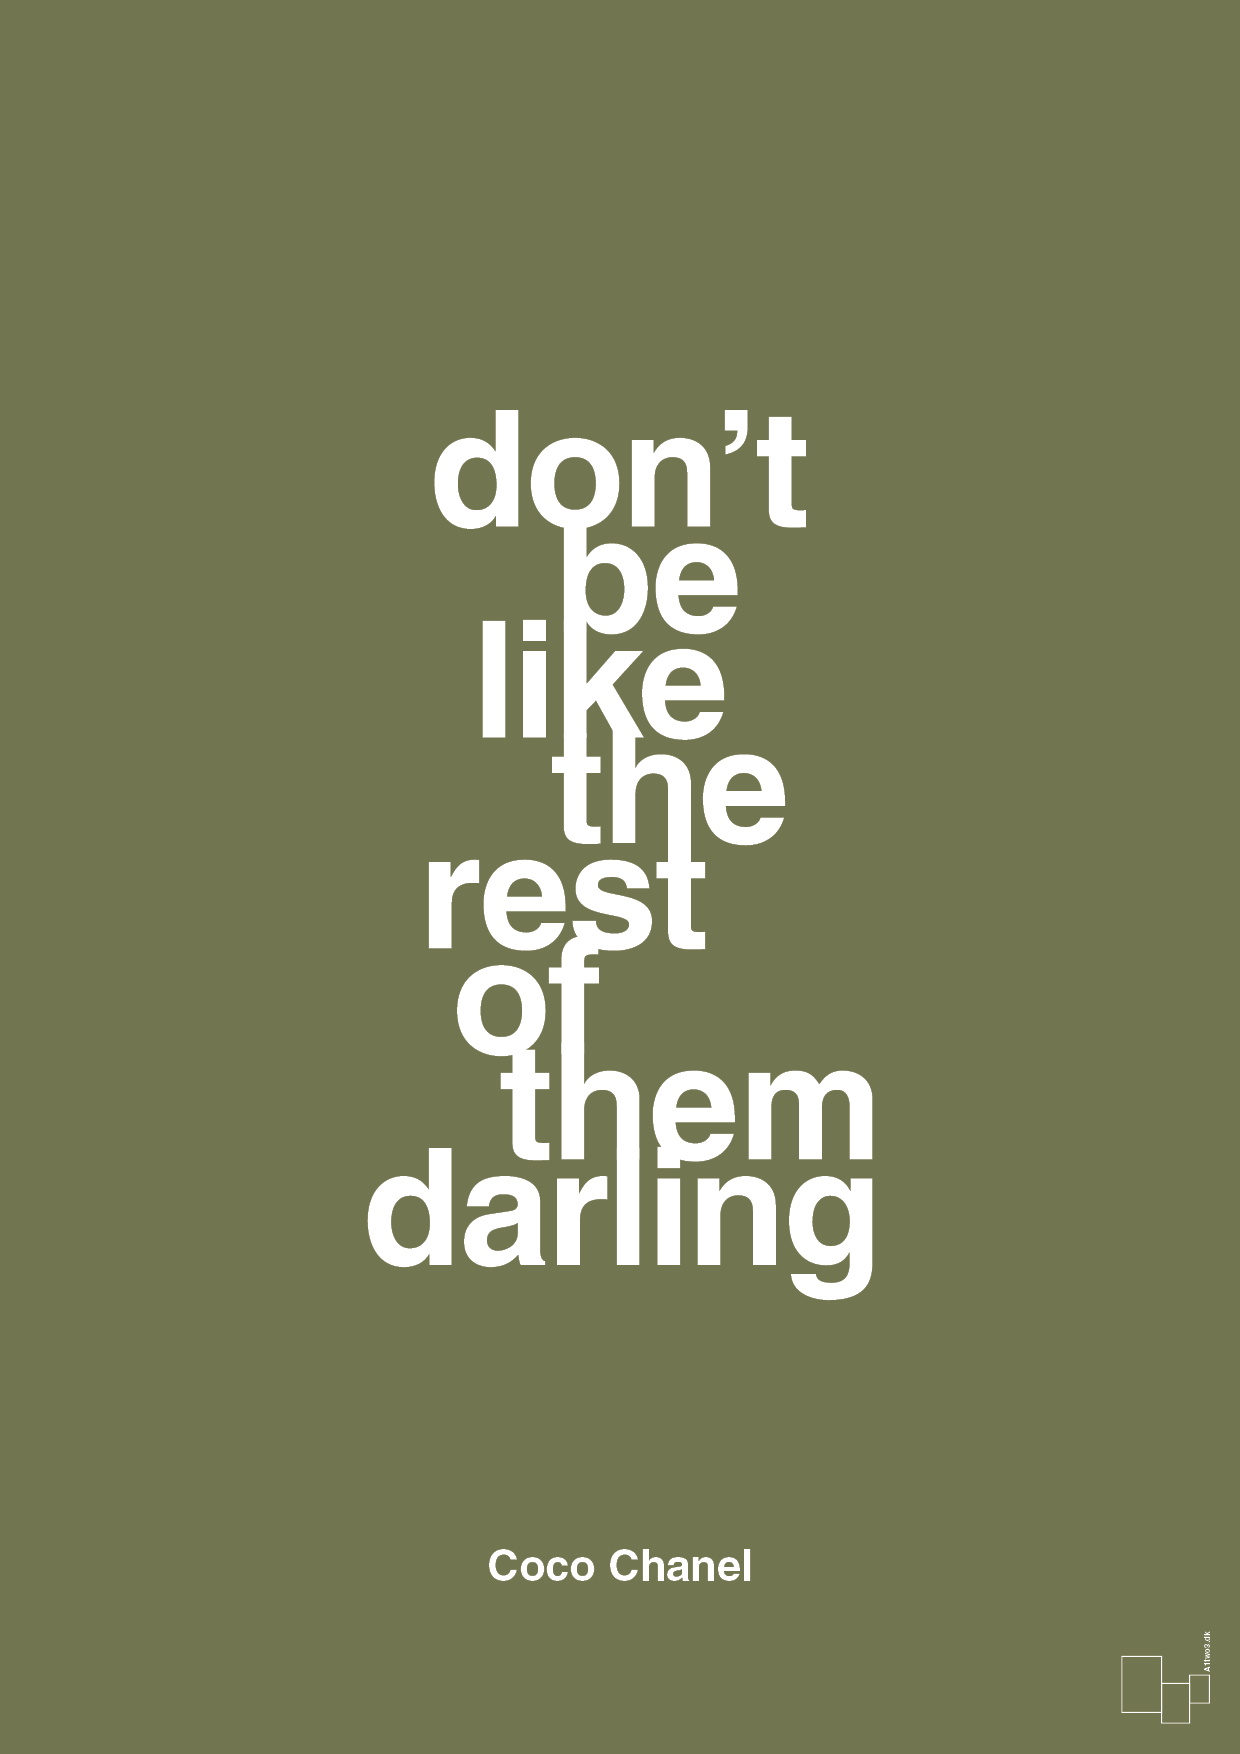 don’t be like the rest of them darling - Plakat med Citater i Secret Meadow